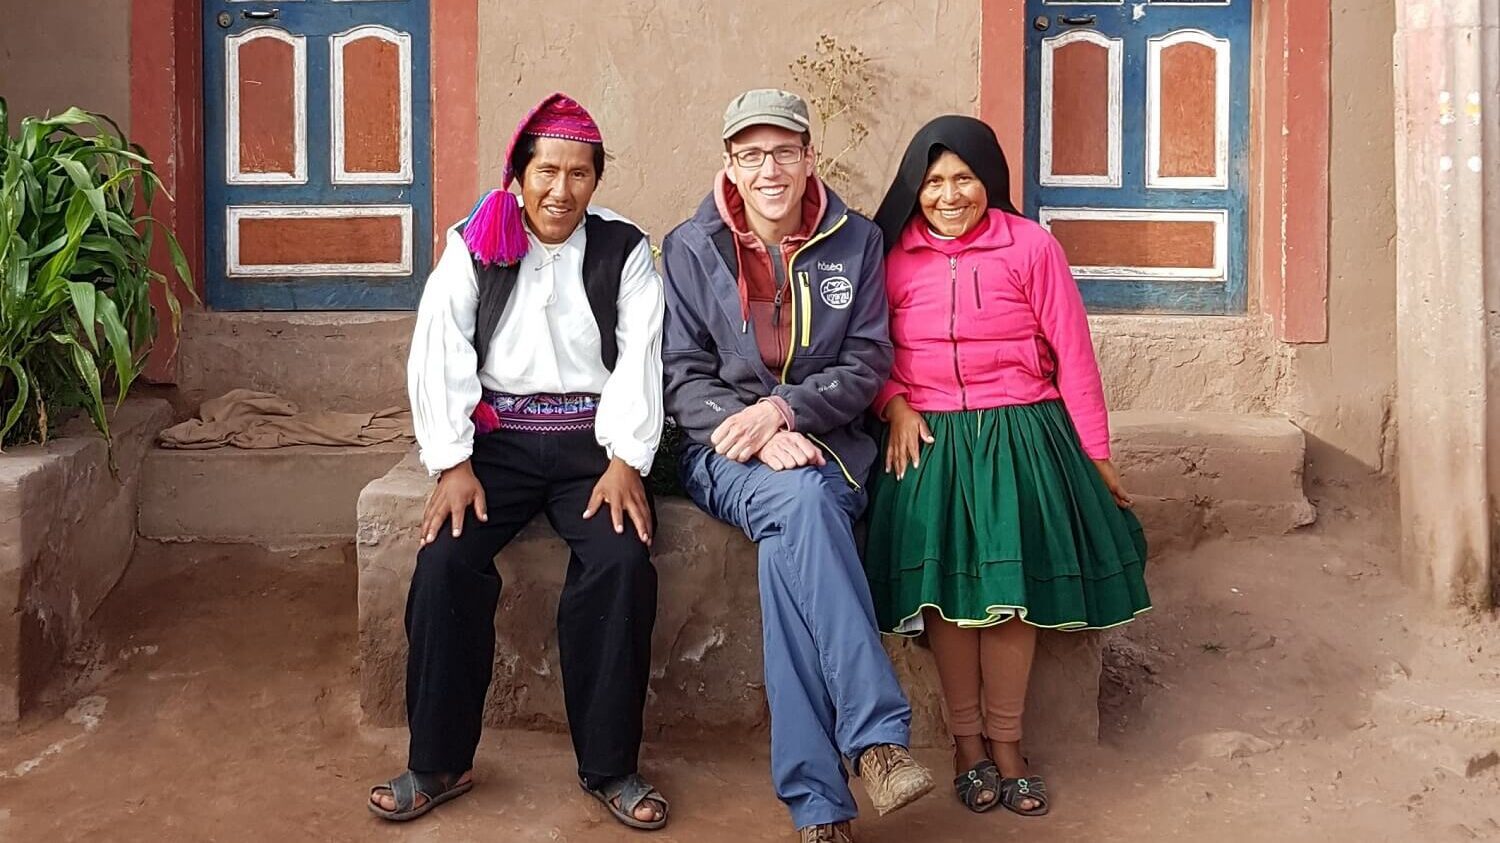 Guido from RESPONSible Travel Peru with homestay hosts Celso and Juana on Taquile island